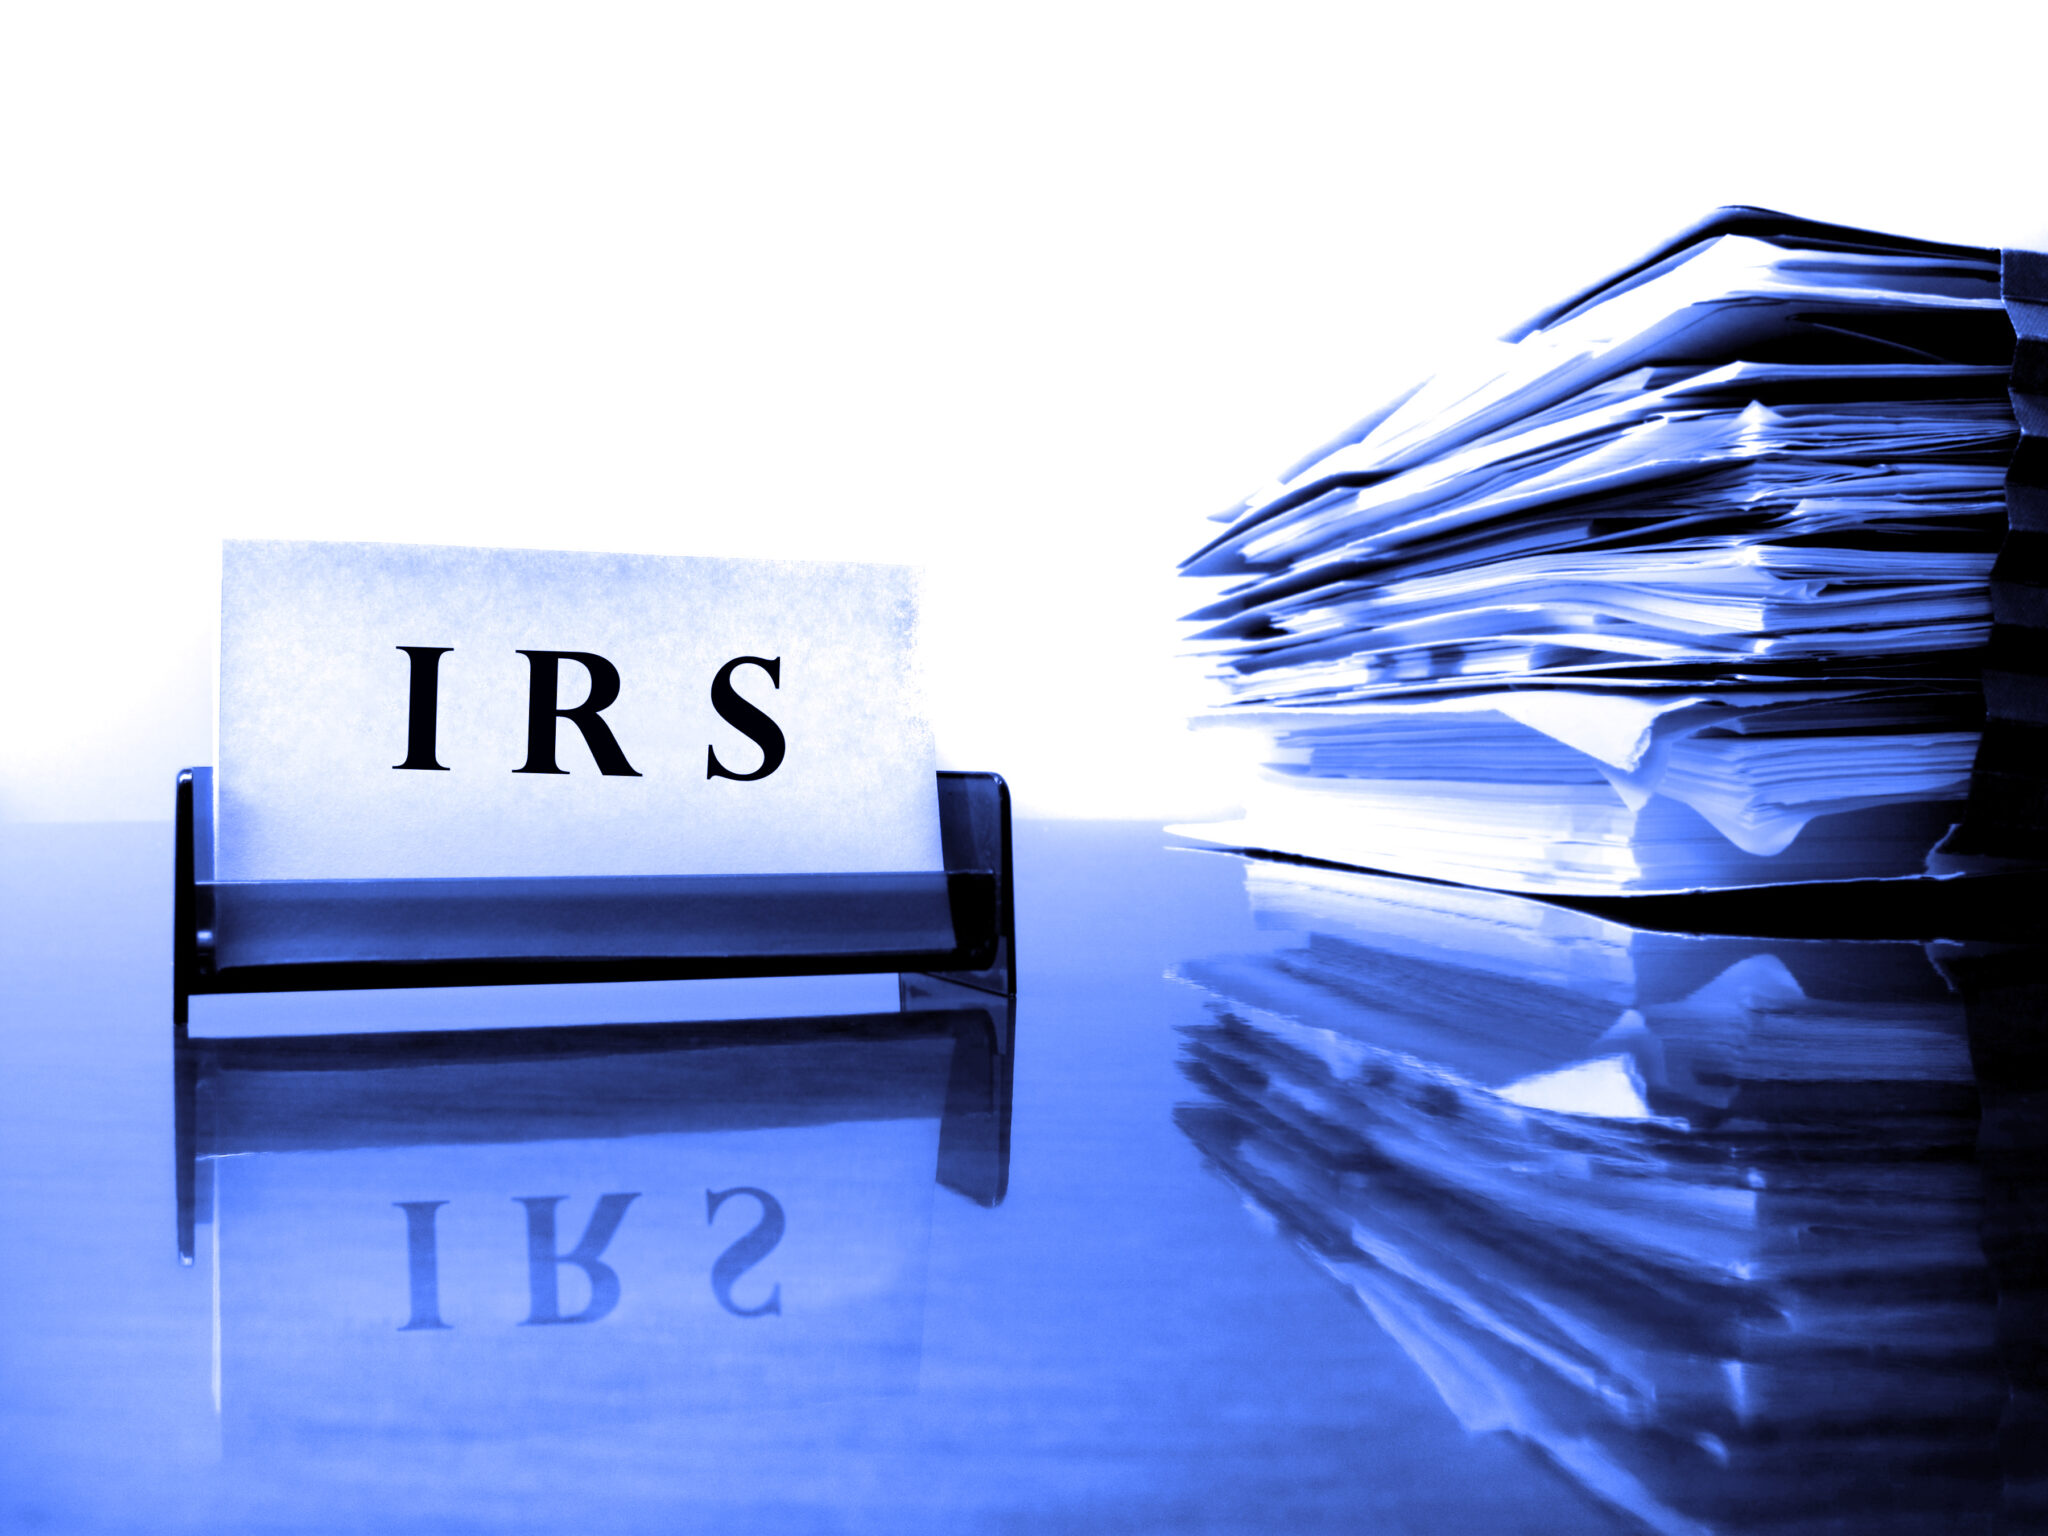 IRS Card with Tax Files